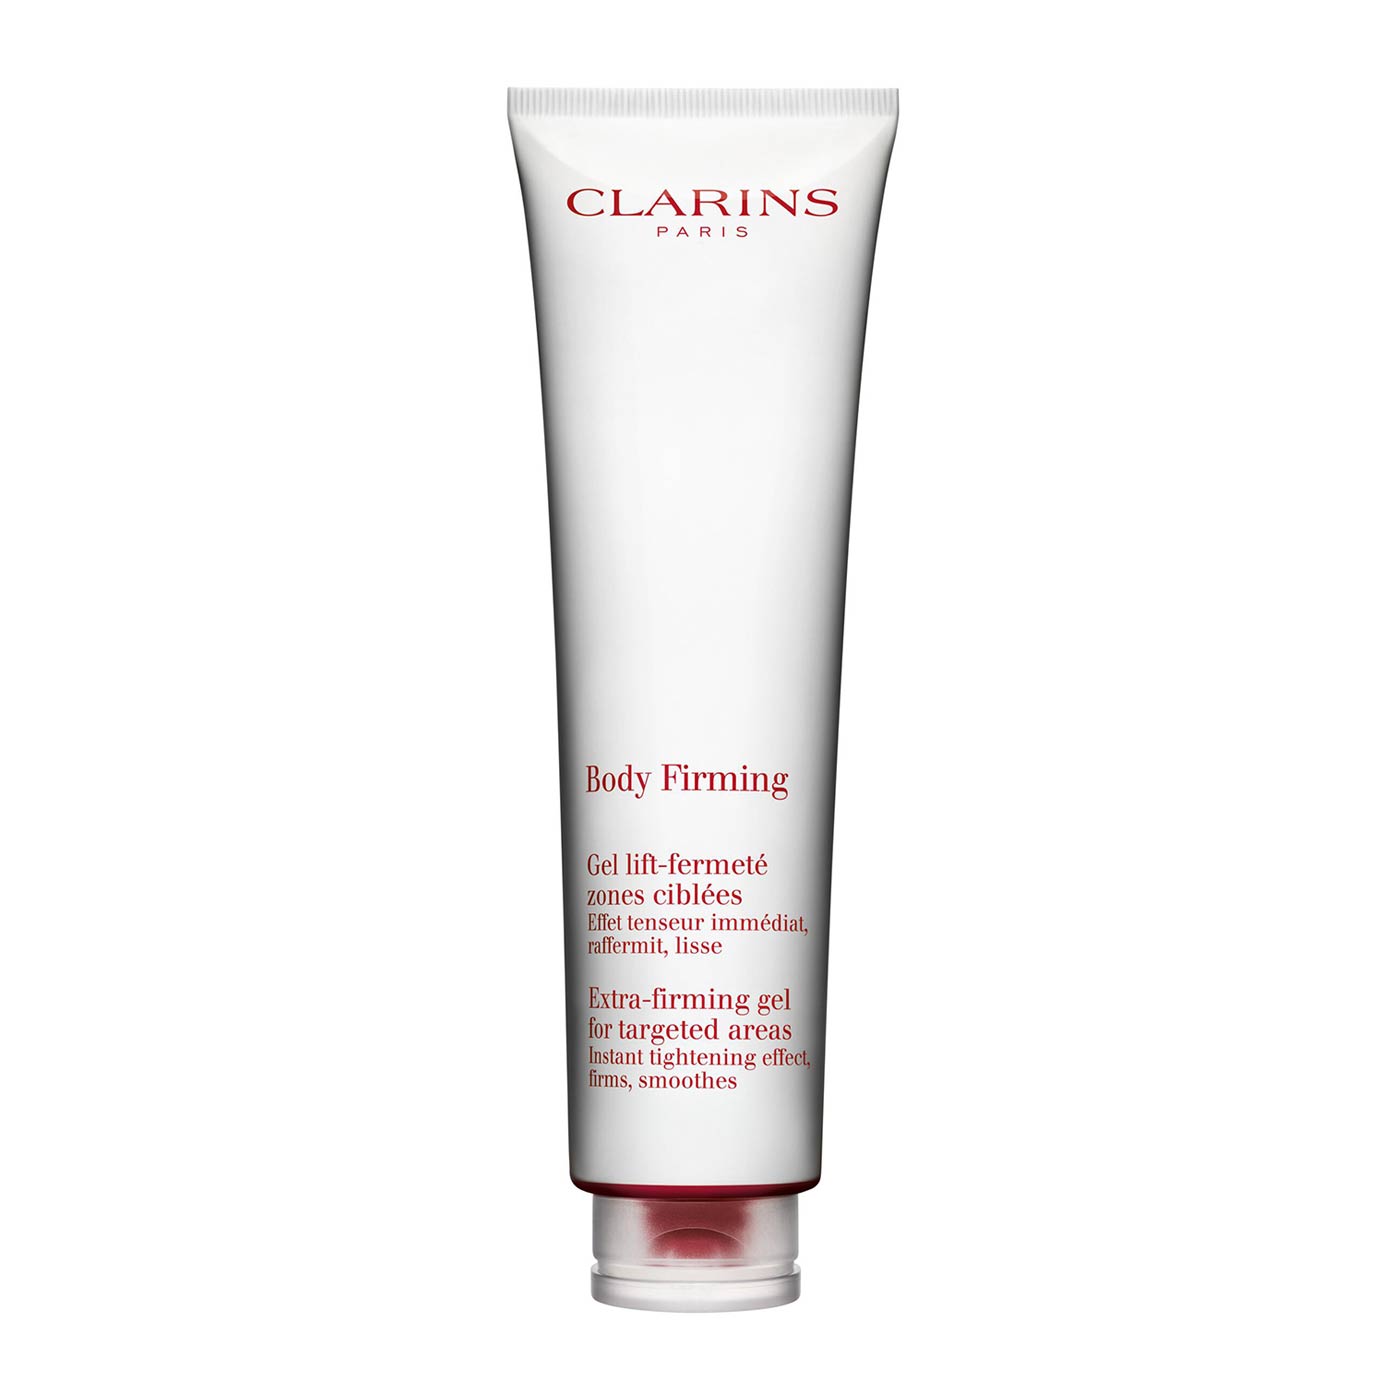 Clarins Body Fit Anti-Cellulite Contouring Expert: A quick review — Covet &  Acquire